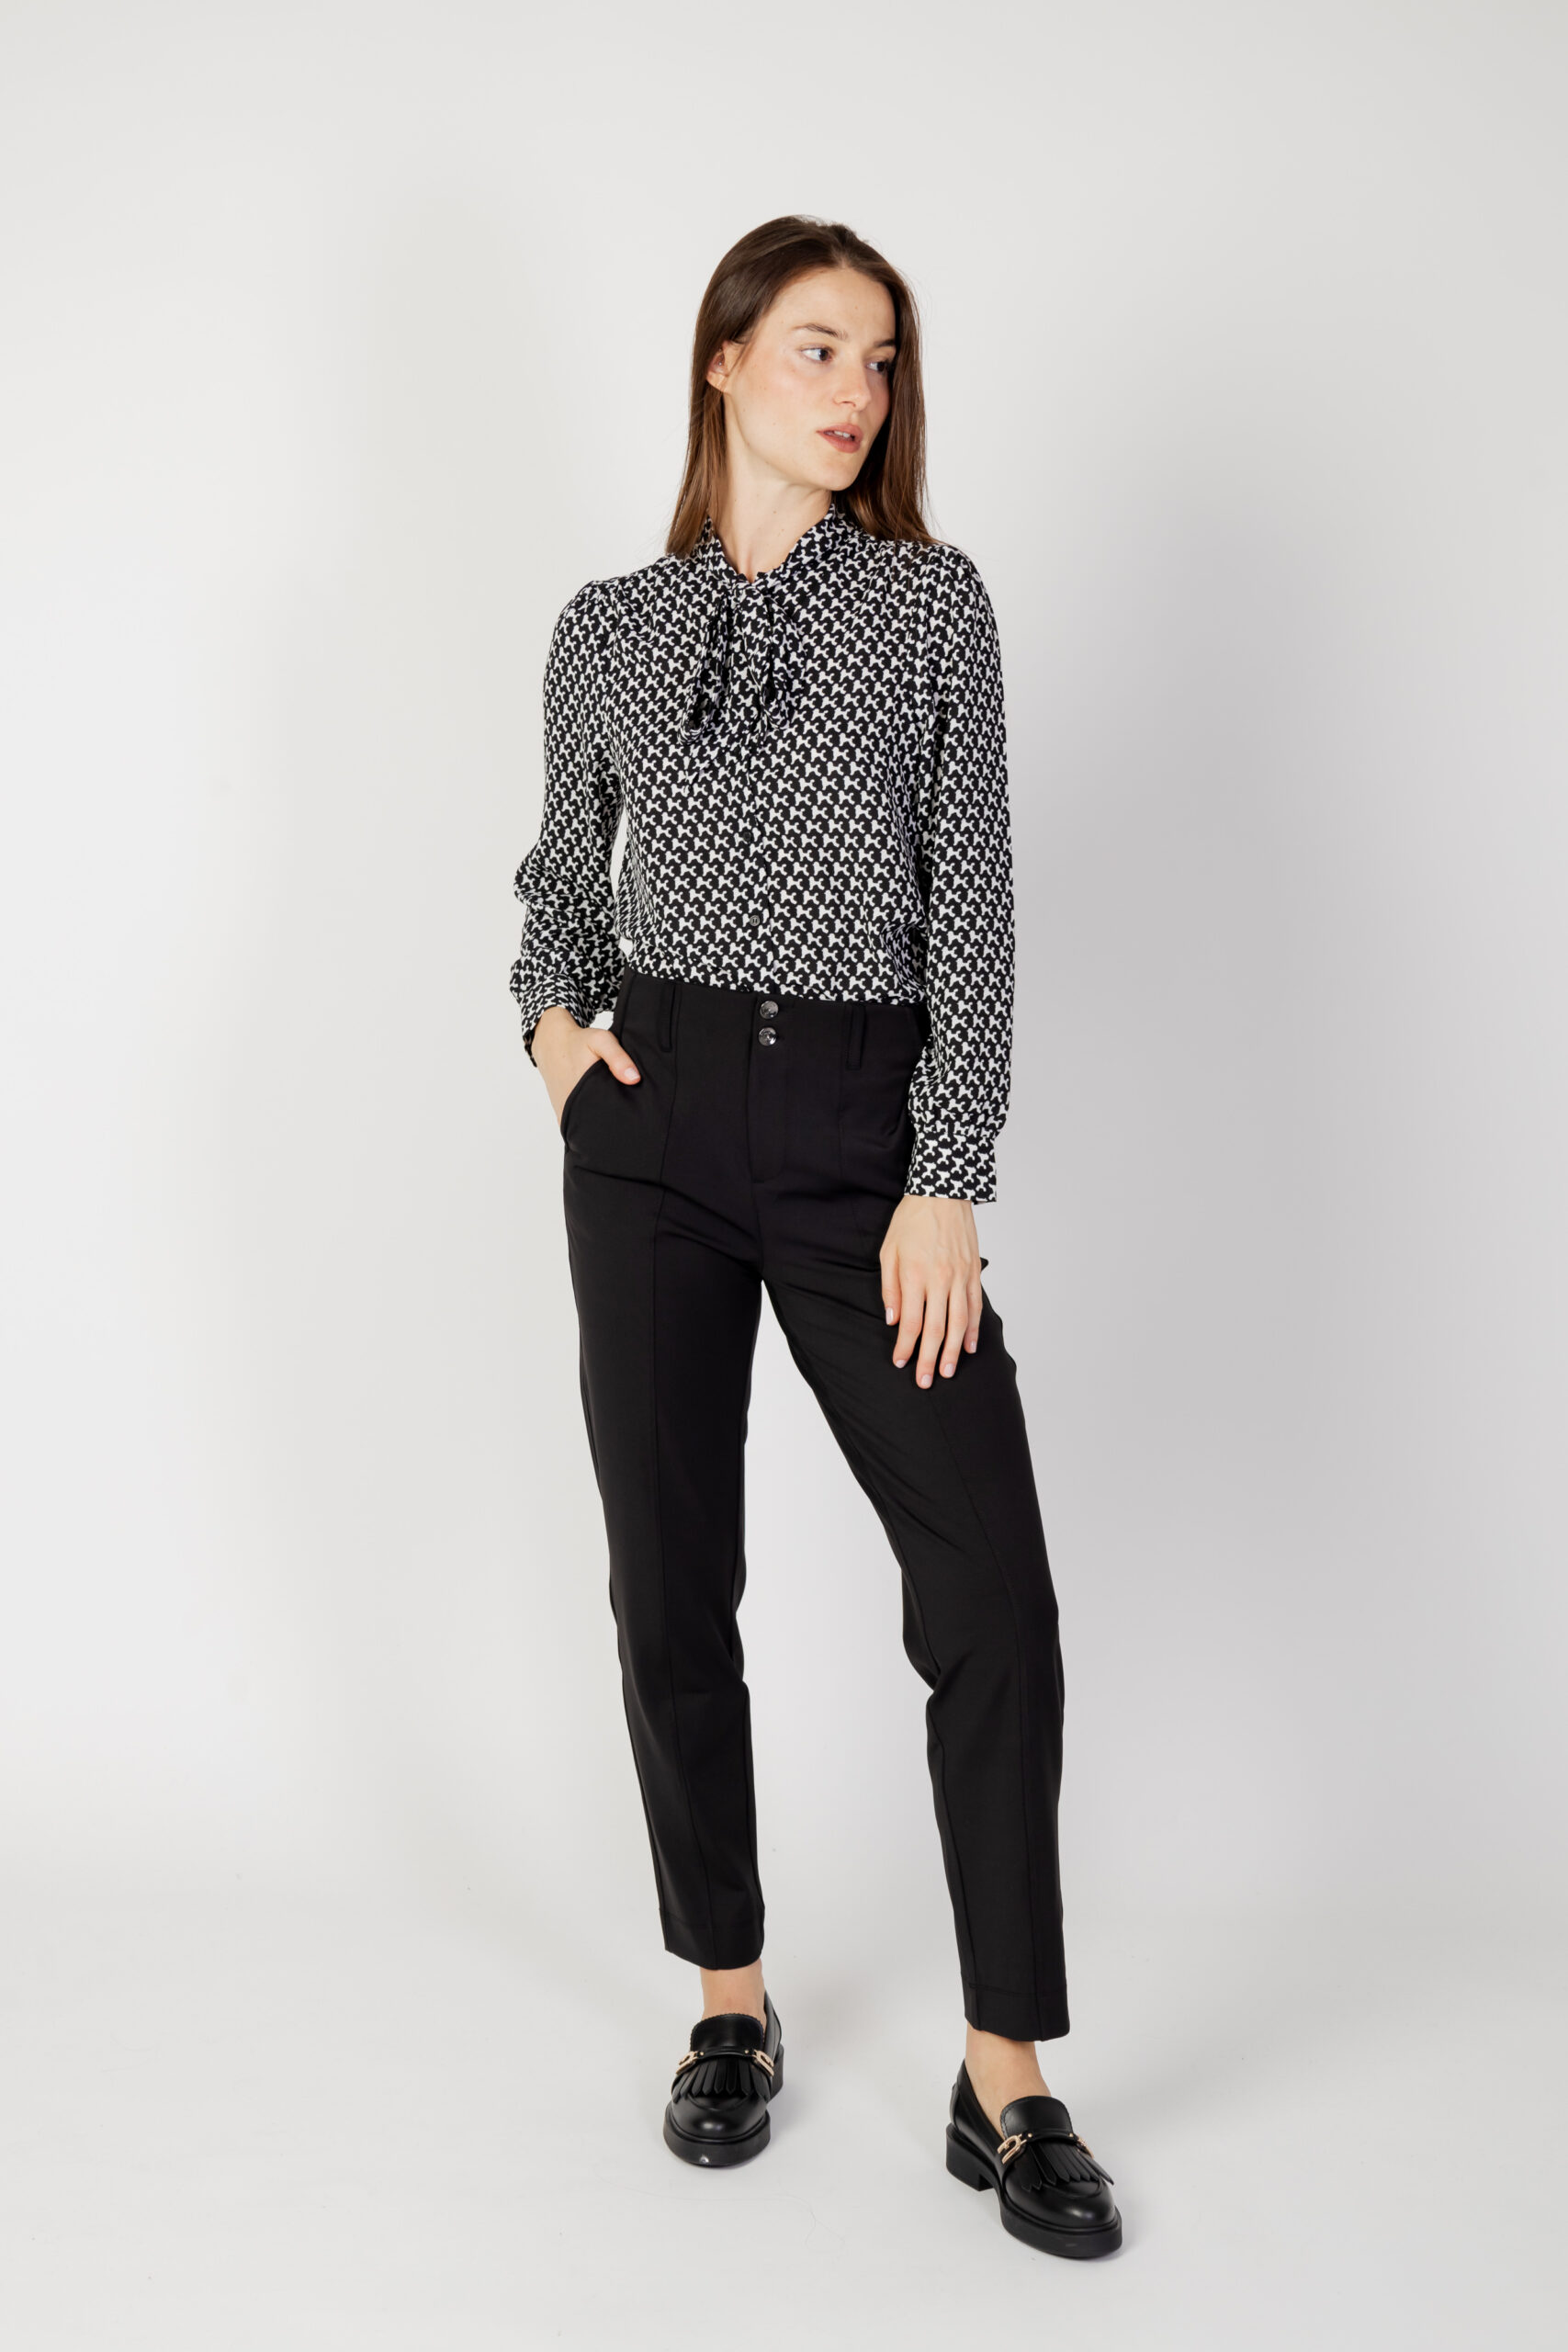 BOW ONLRUTH Nero SHIRT | lunga L/S Only Shop Bluse Goccia LIFE manica PTM